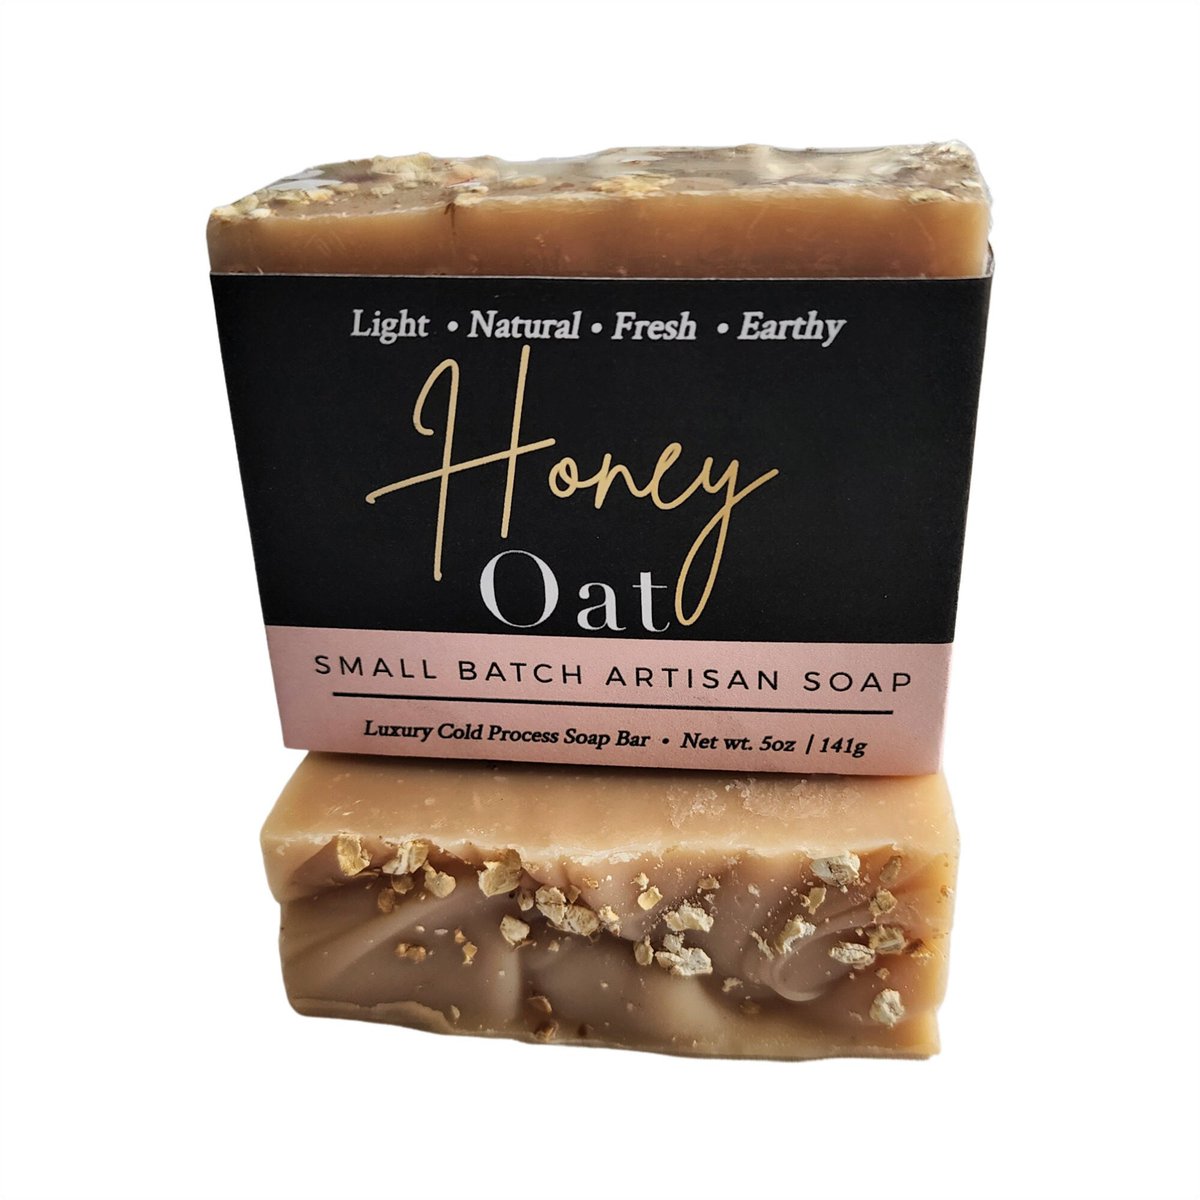 Honey Oat Soap, Natural Soap, Soap Gift, Vegan Soap, Mother's Day Gift, Cold Process Soap, Body Soap, Soap Bar, Self Care, Skin Care tuppu.net/e988b3be #shopsmall #gifts #Christmasgifts #Etsy #handmadesoap #soap #DeShawnMarie #OatmealSoap